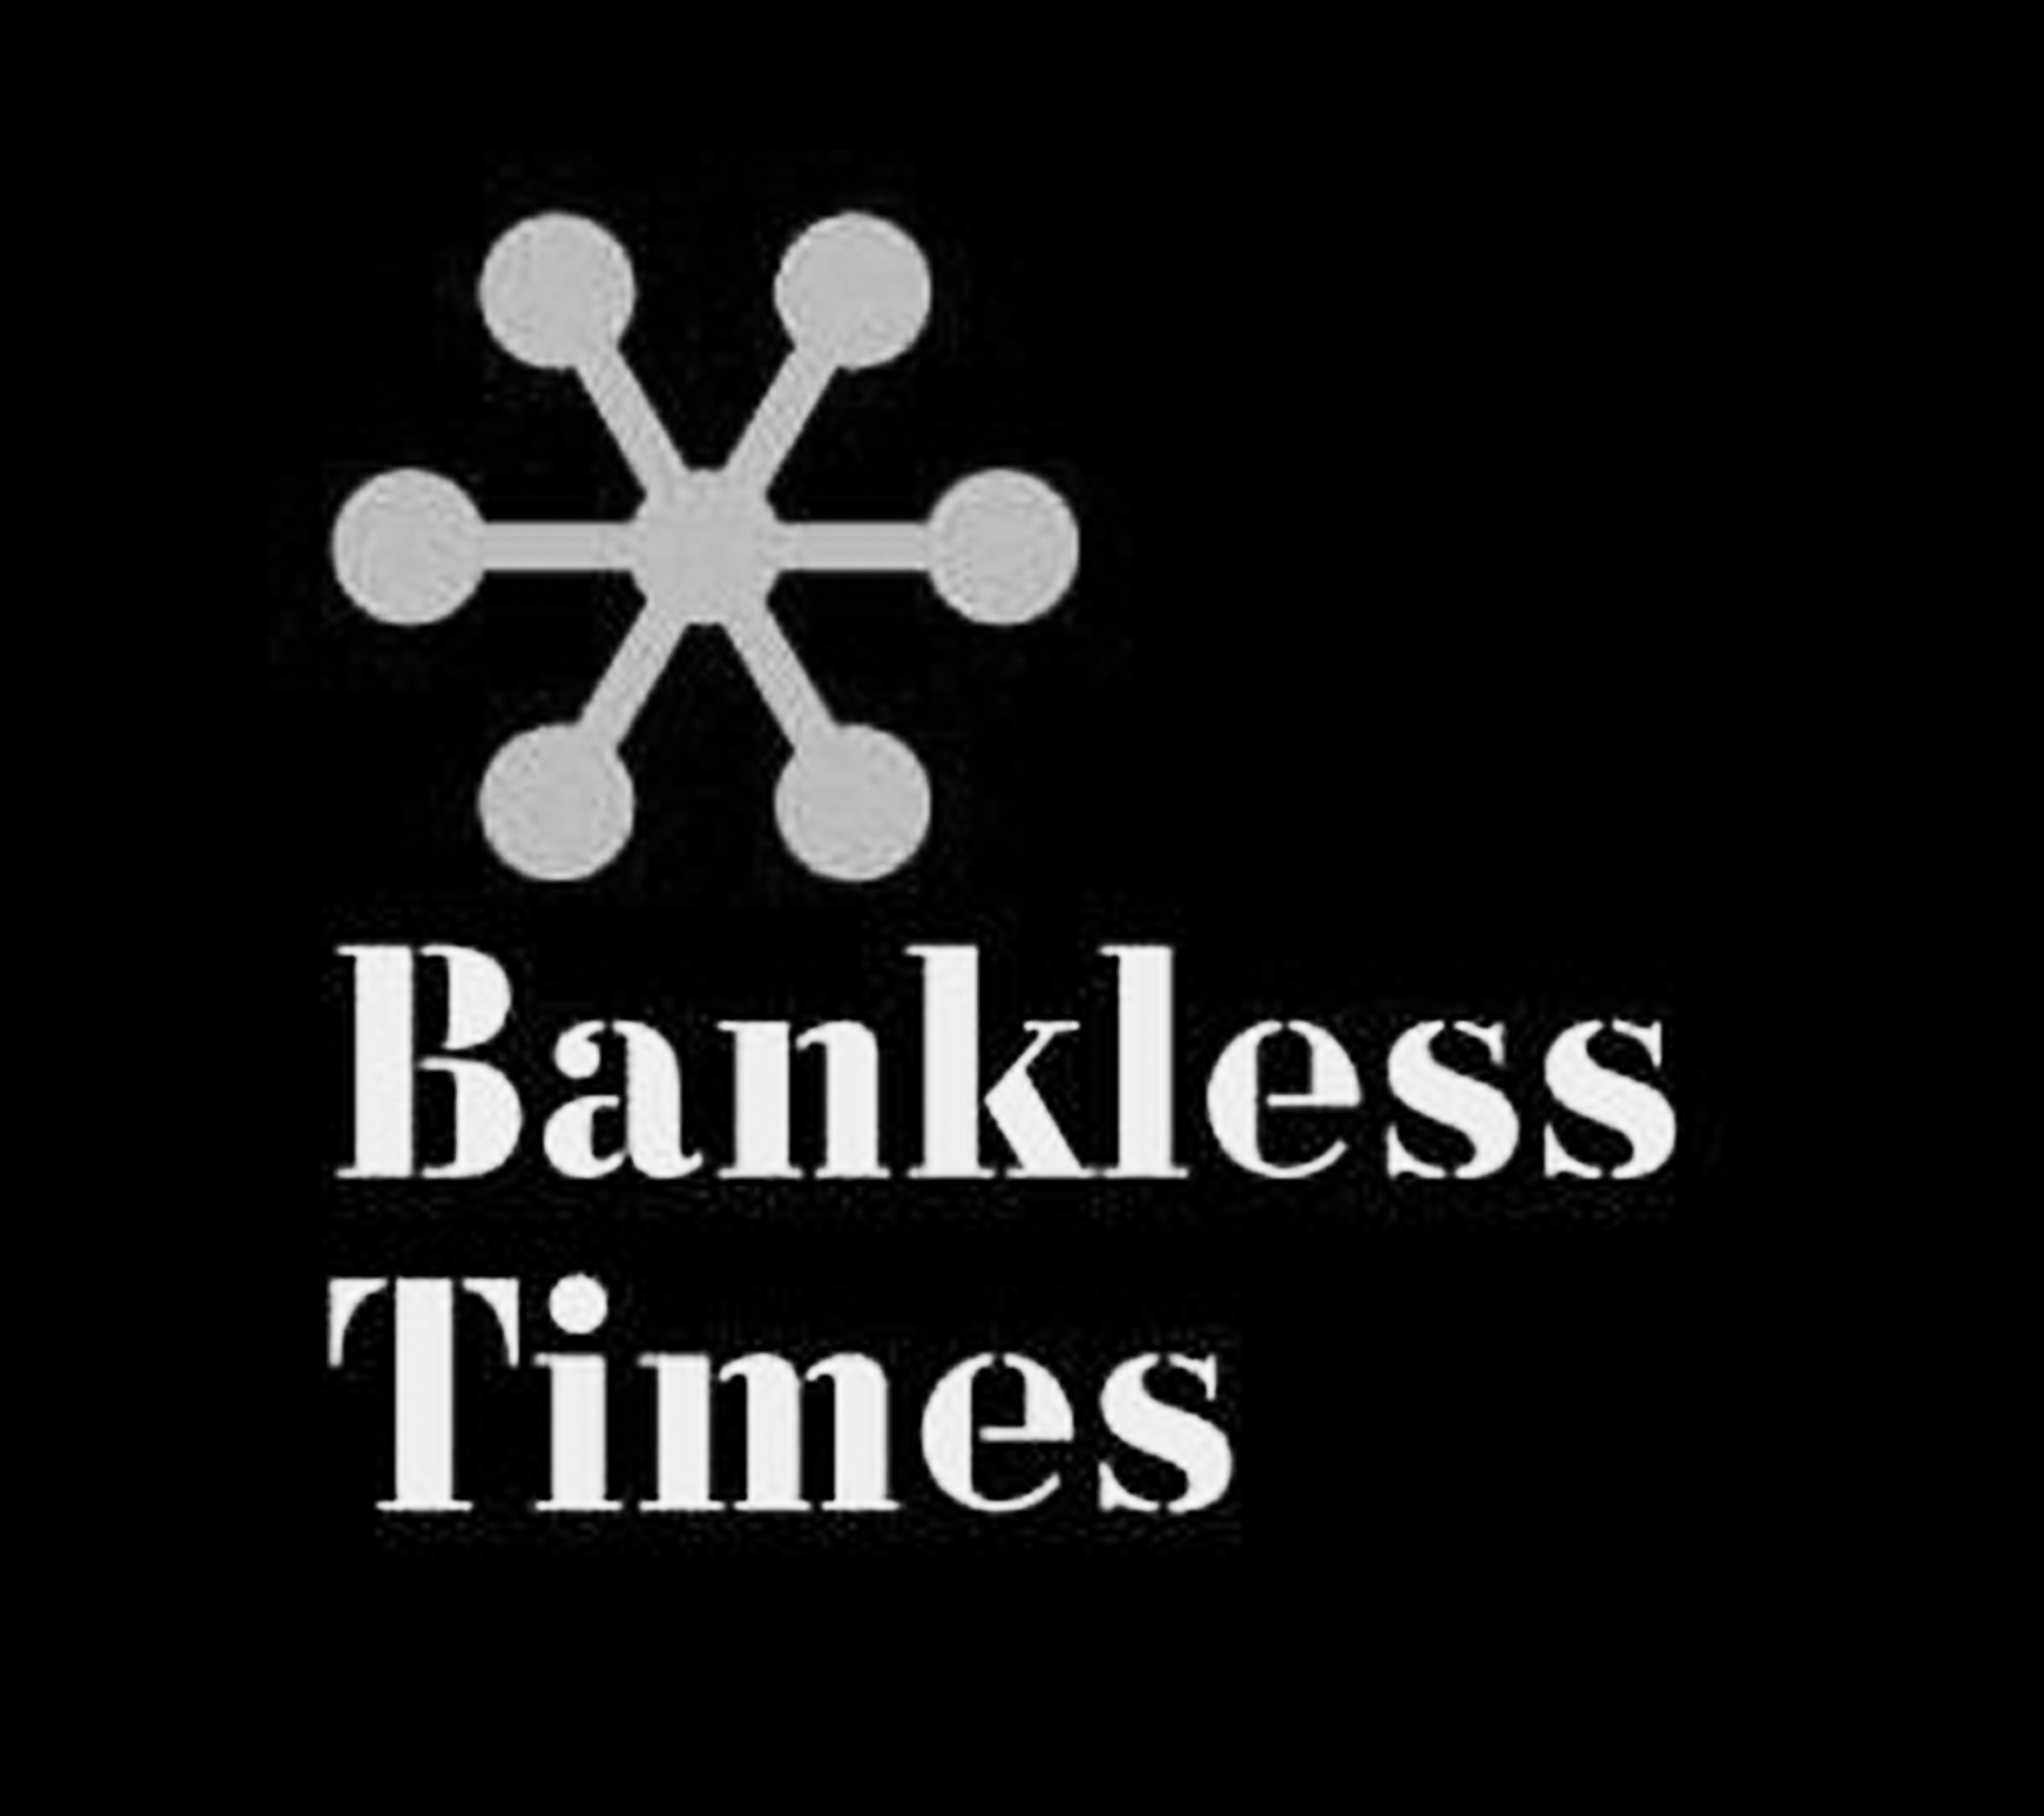 Bankless Times